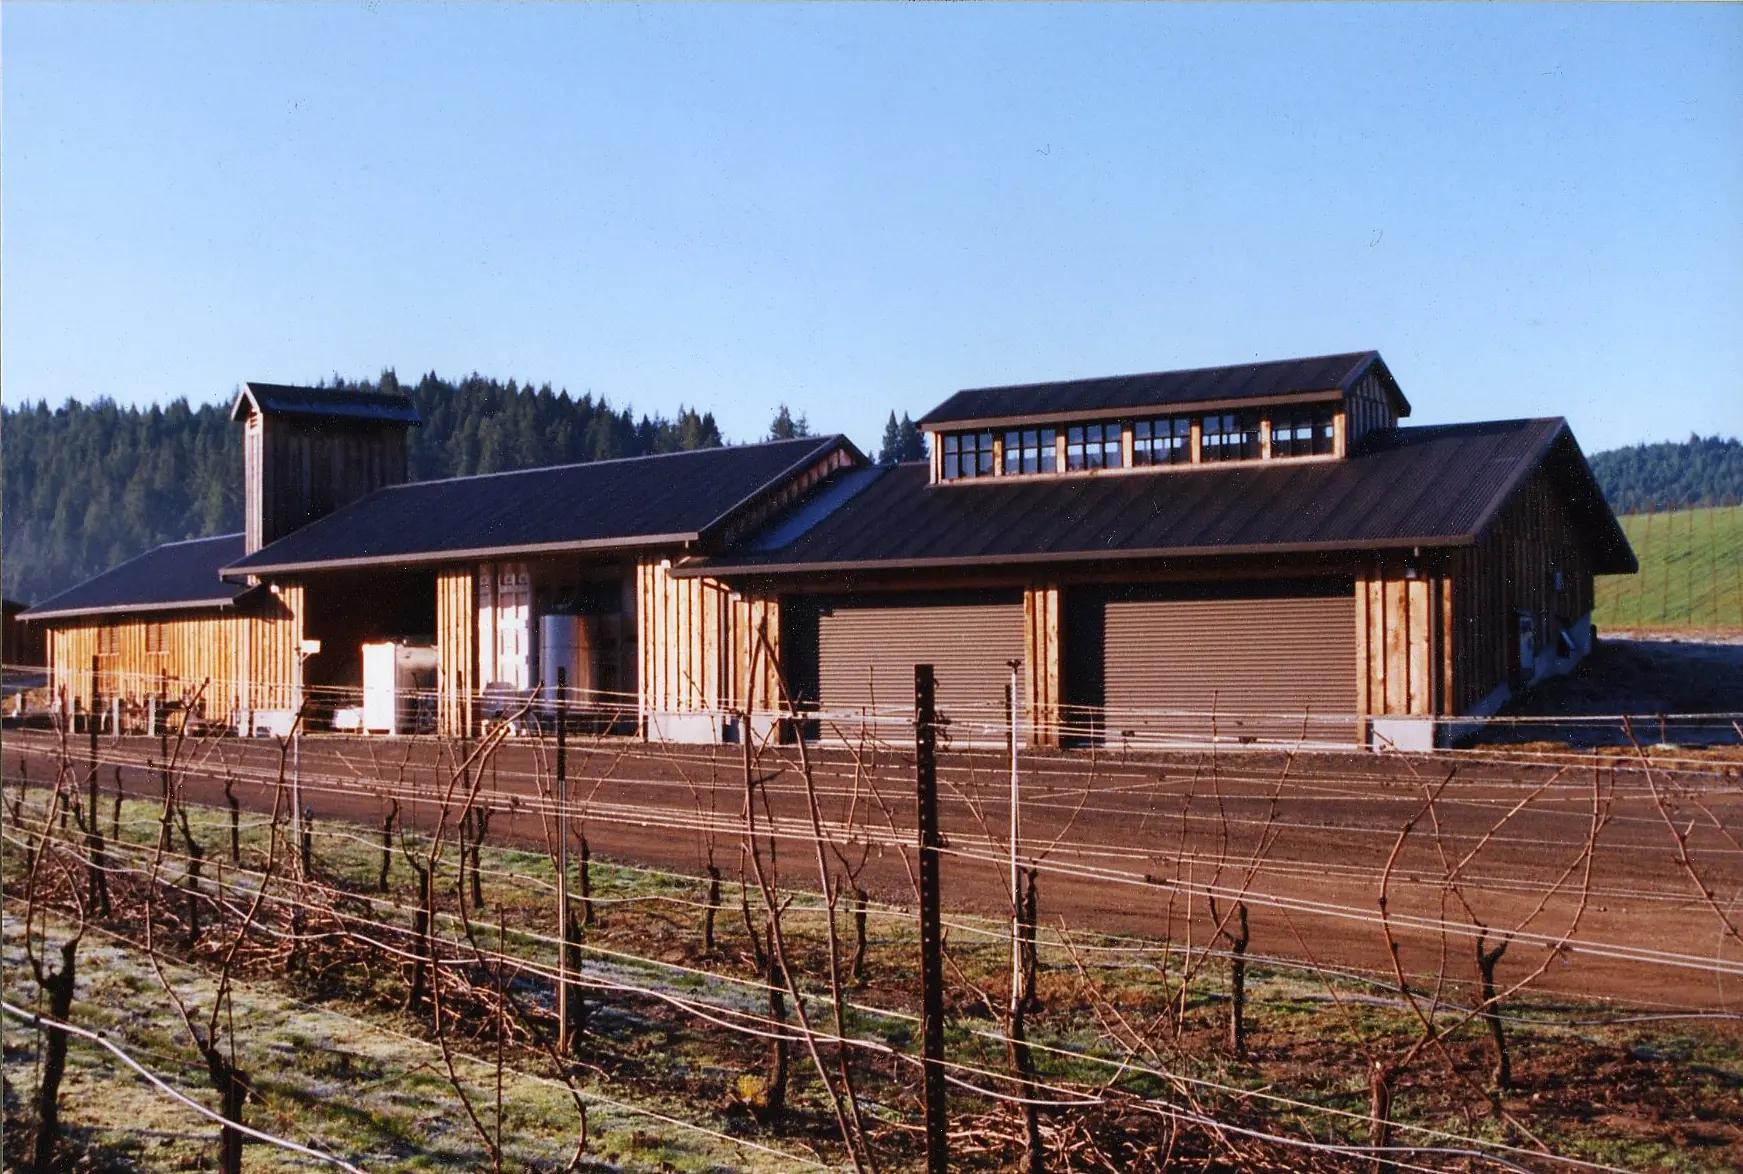 Goldeneye Winery Barn; designers, Philo Saw Works with architect Dennis McCroskey, P.E., AIA; Mendocino, CA; barn exterior